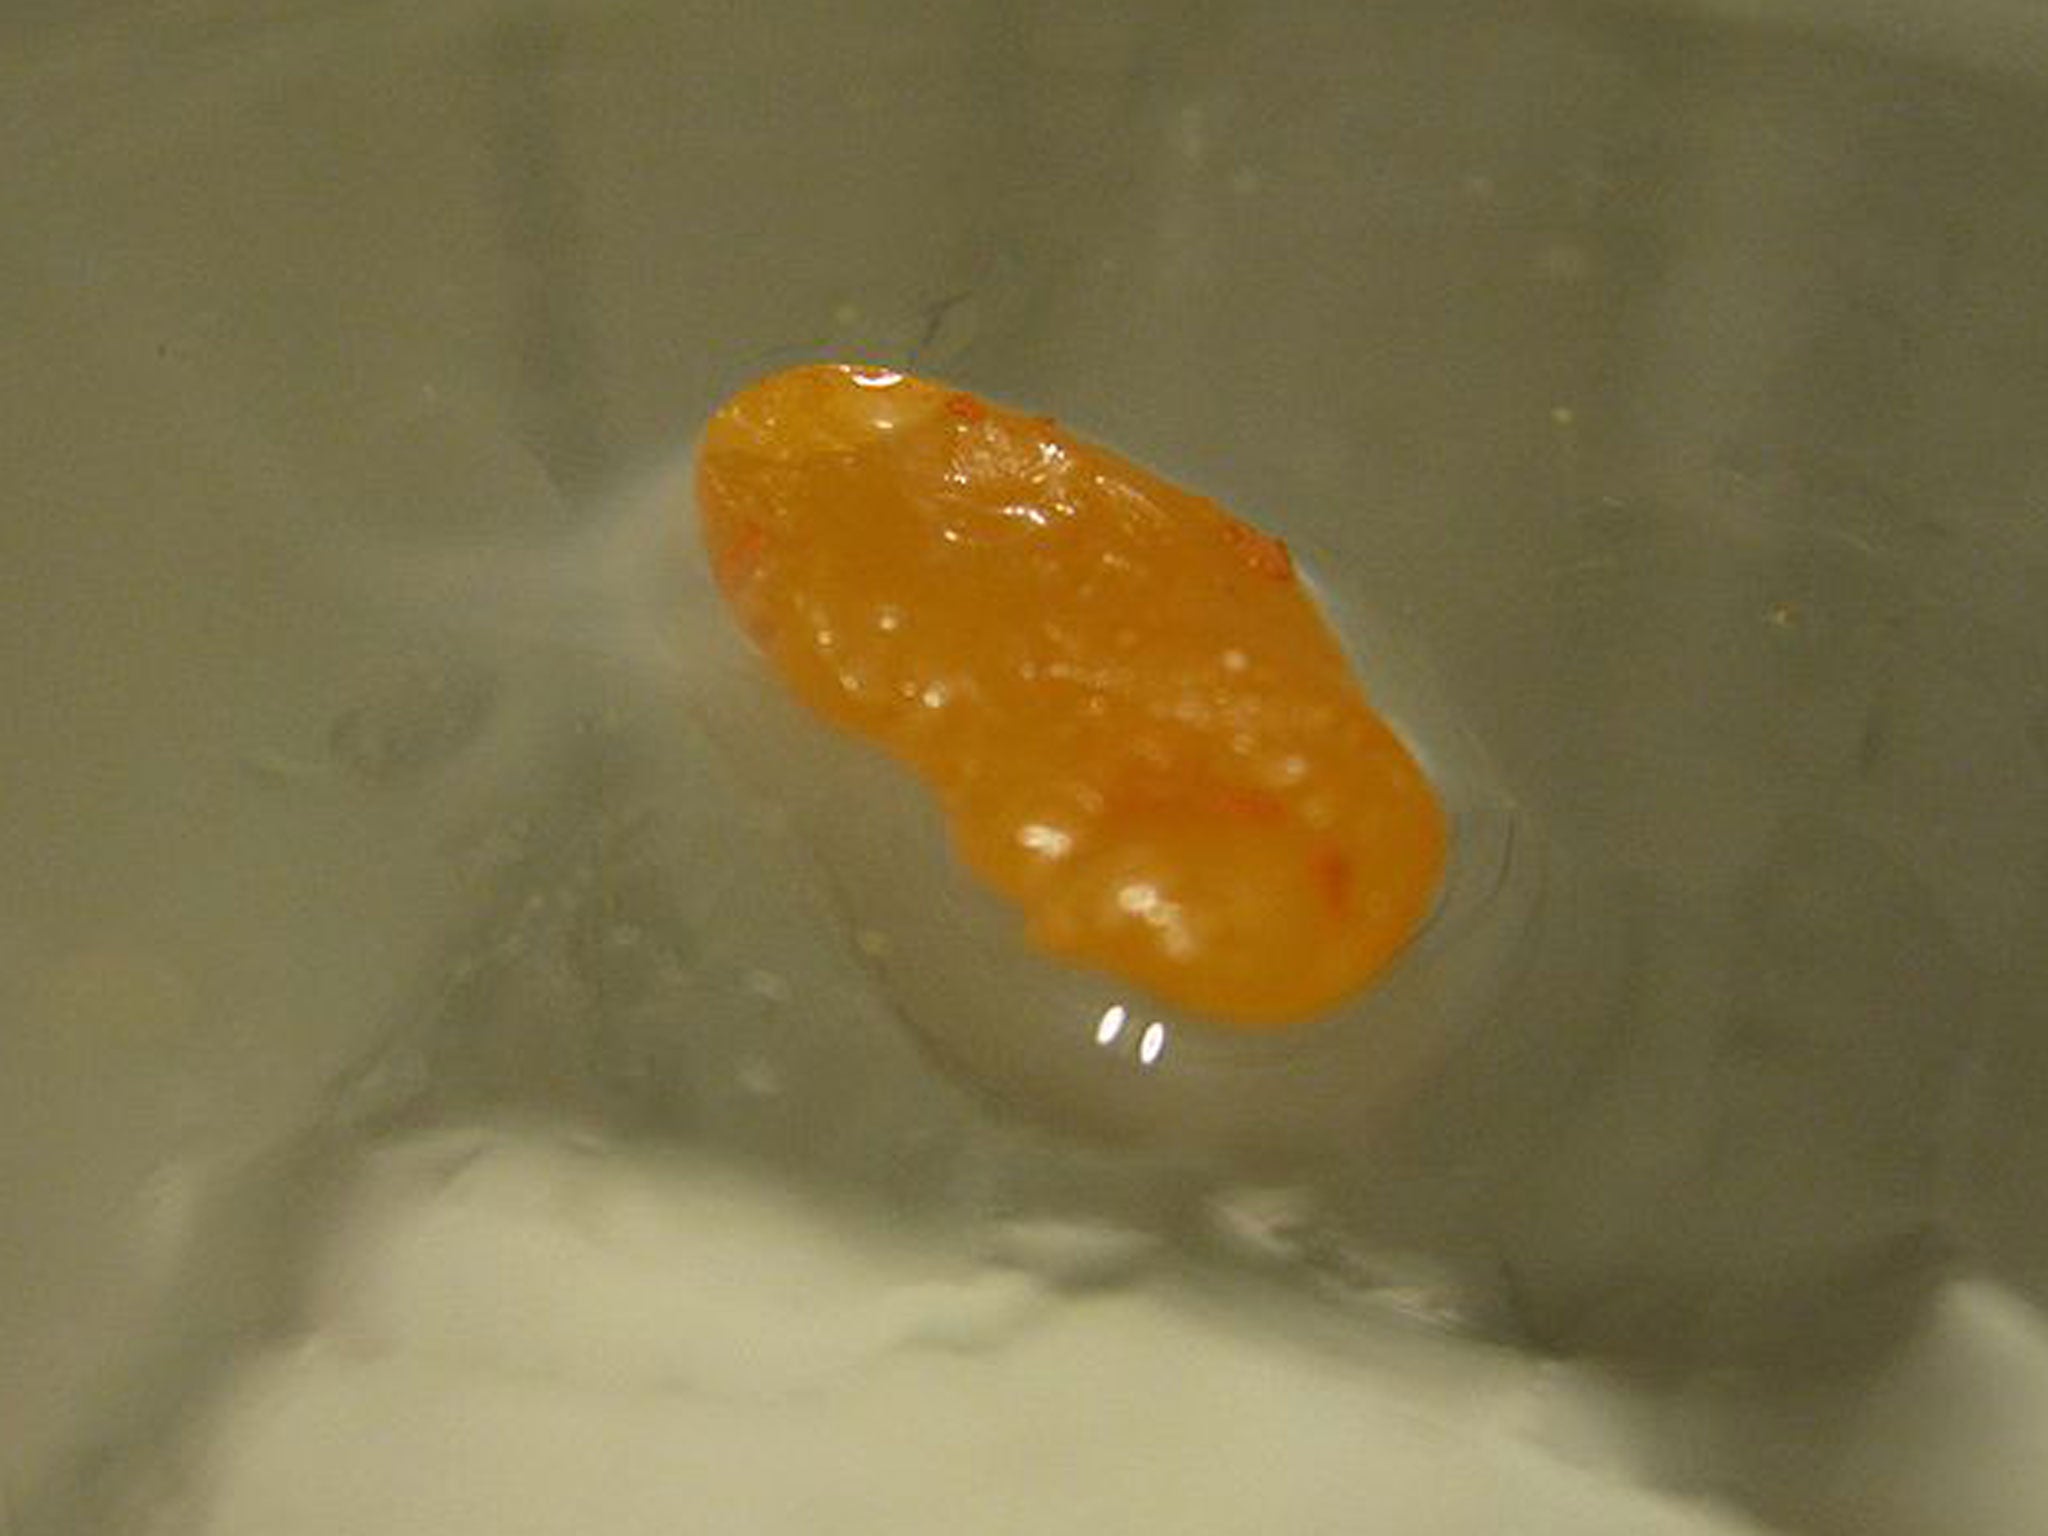 White phosphorus has a similar appearance to amber